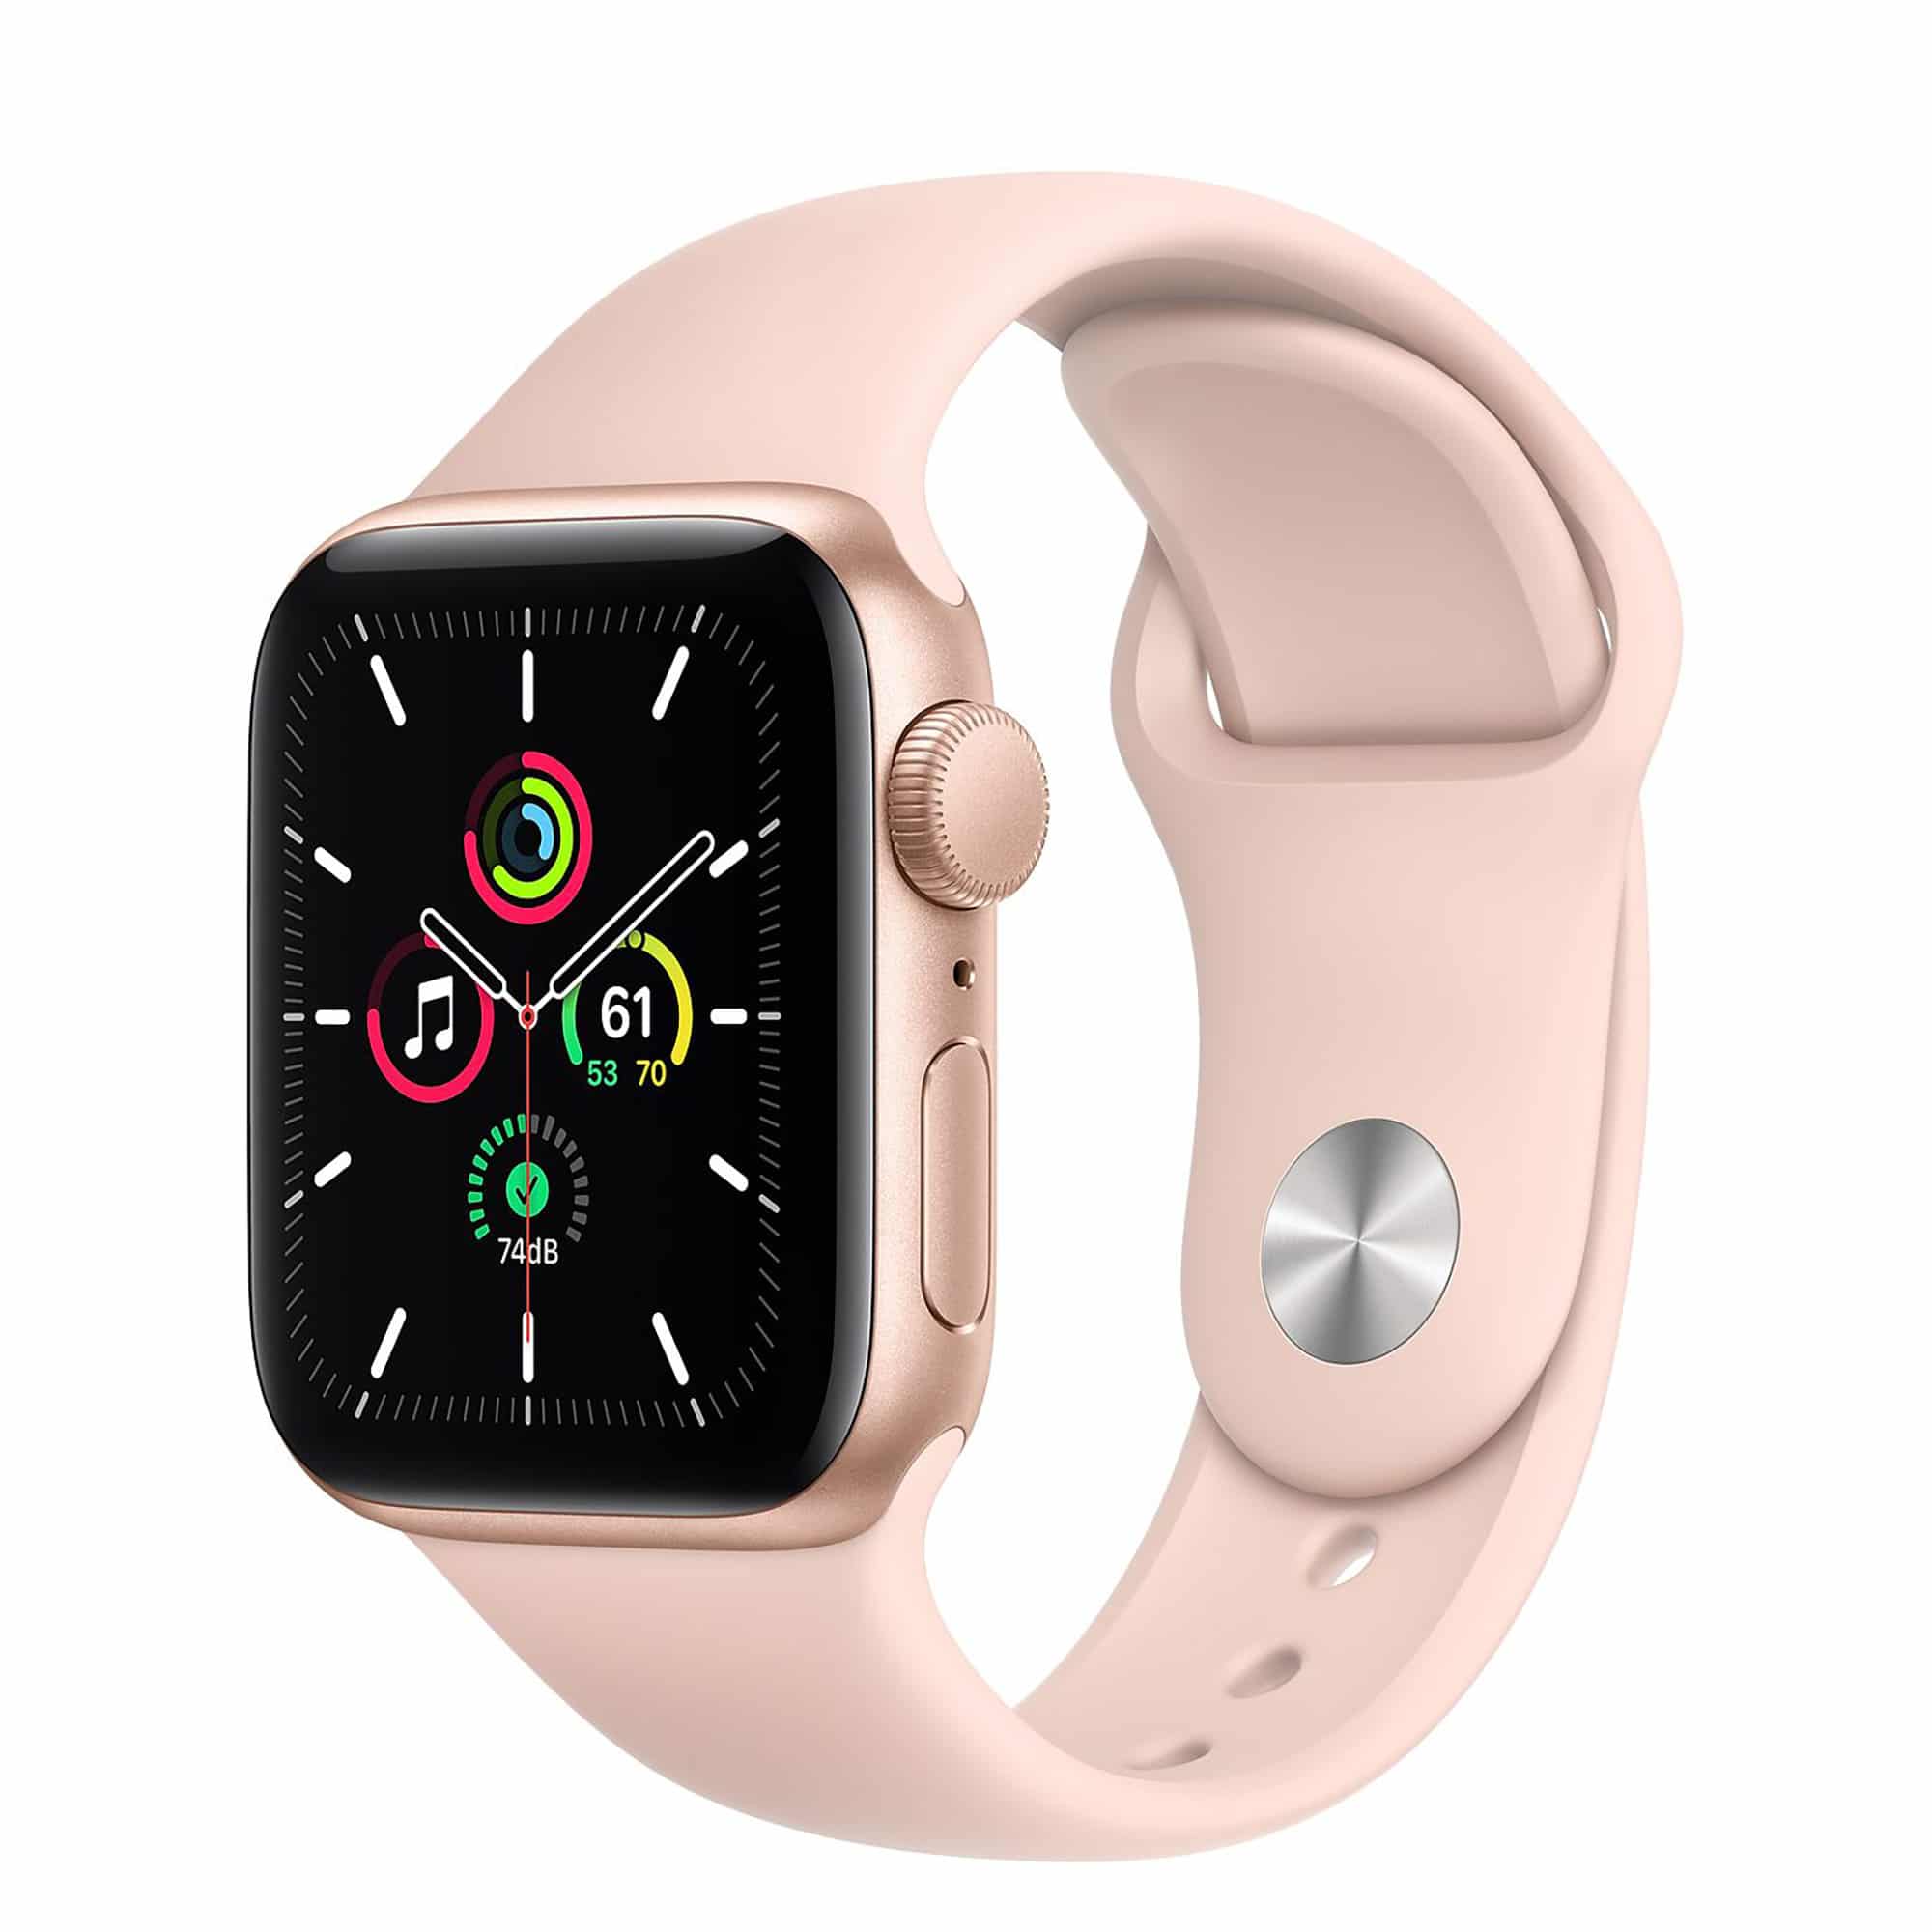 Apple Watch Apple Store Apple Stores to Use Special Safes for Gold 